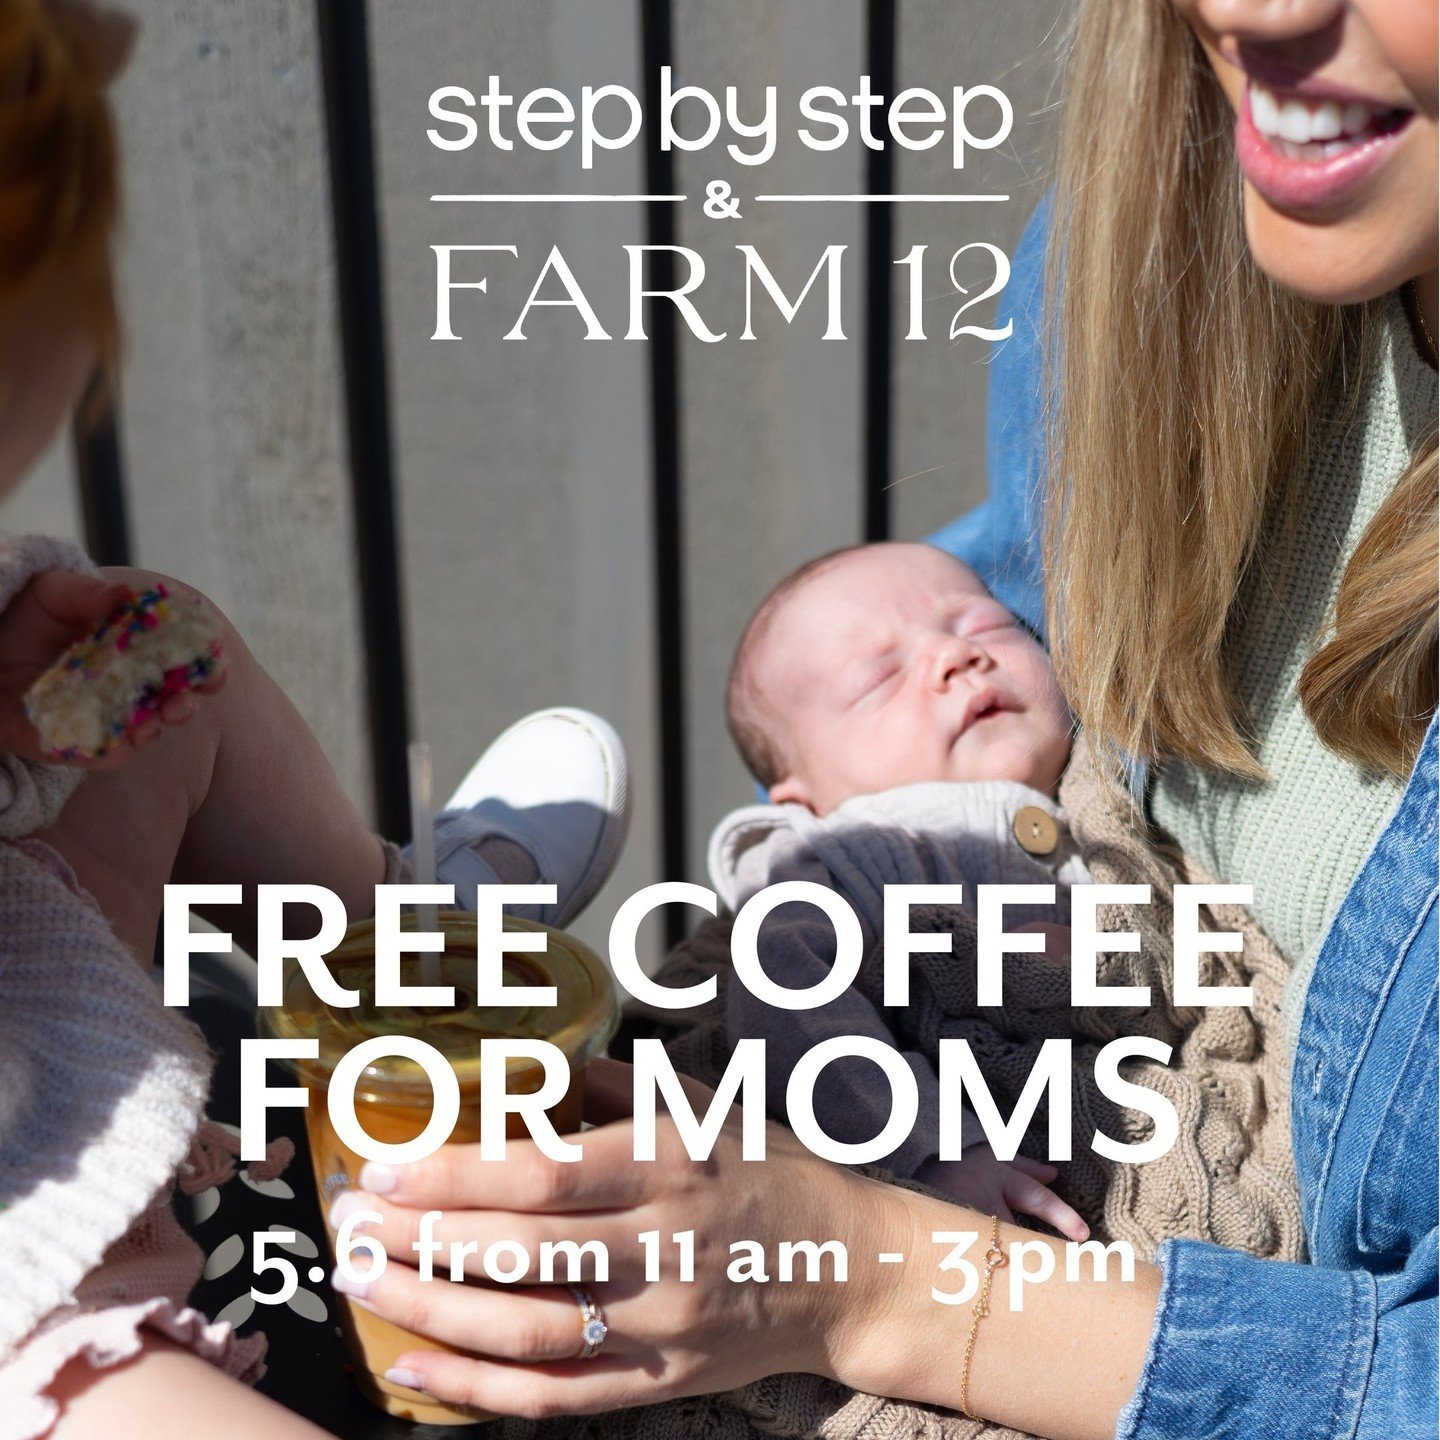 If you're on your journey to motherhood, have little babies in heaven or little babies in your arms. If you have little ones pulling on your leg or bigger ones pulling you to soccer practice.⁠
⁠
If you're a mom, join us for a free 12 oz drink of your